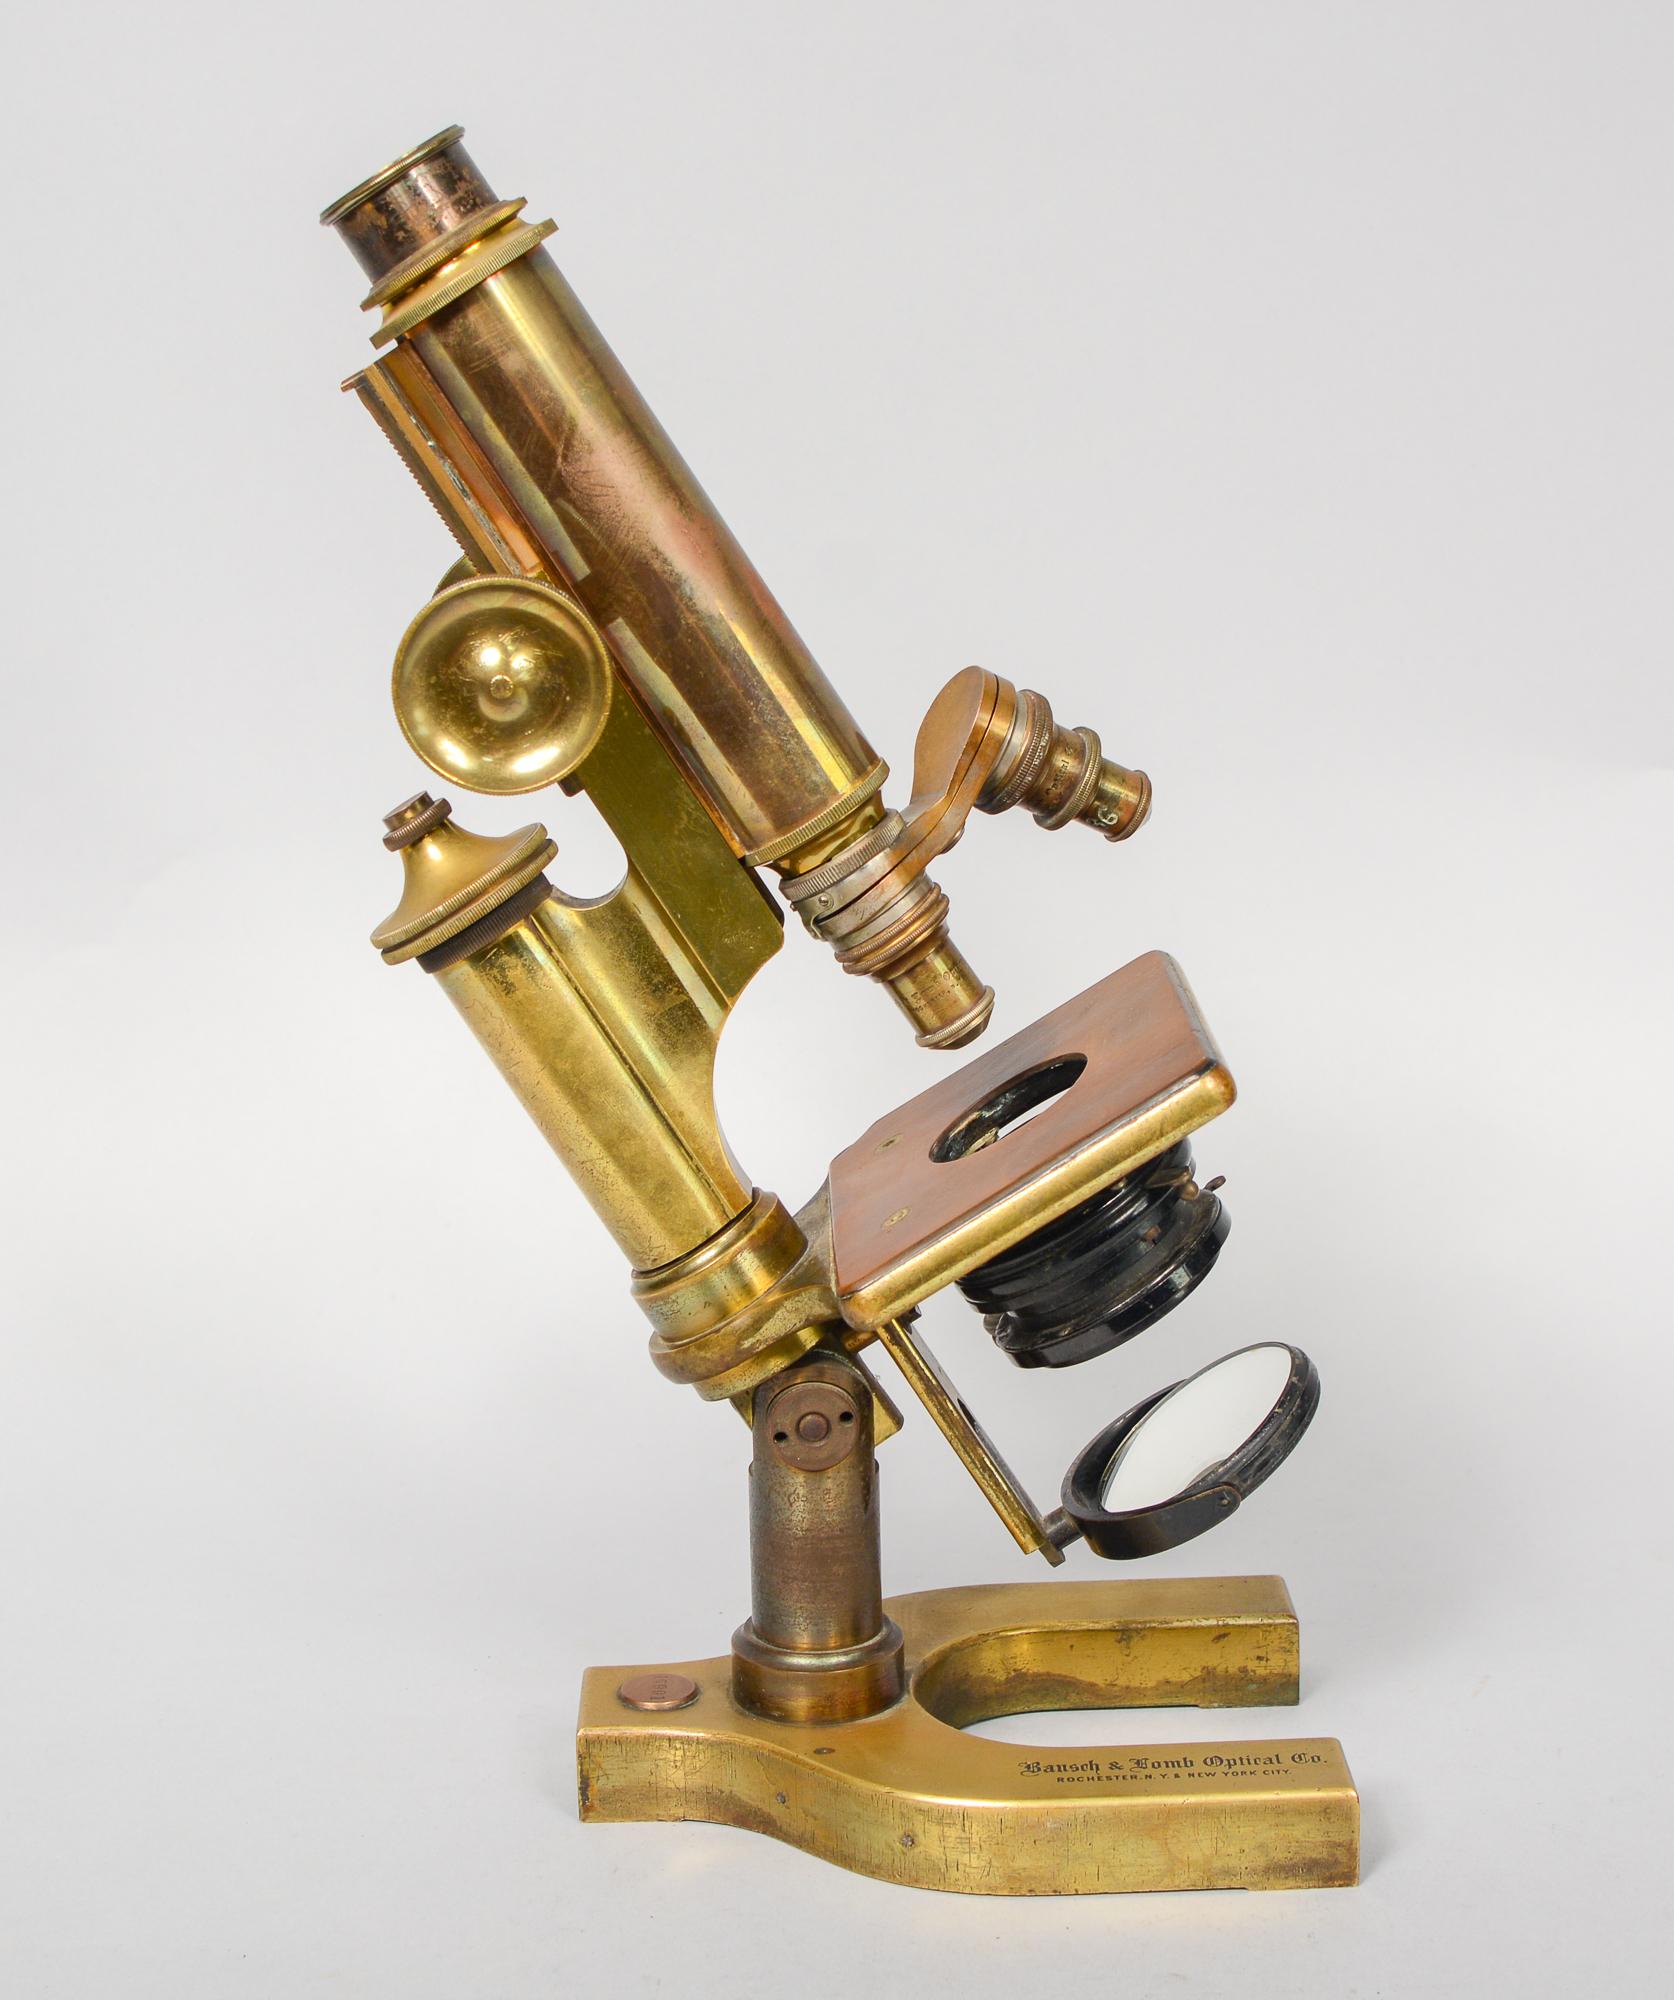 Brass and iron Bausch and Lomb microscope. This microscope has two objectives. Dimensions listed are for the box. The microscope is 4.25 inches deep, 5.75 inches wide and 13 inches tall. This is from an older collection belonging to a doctor. We do